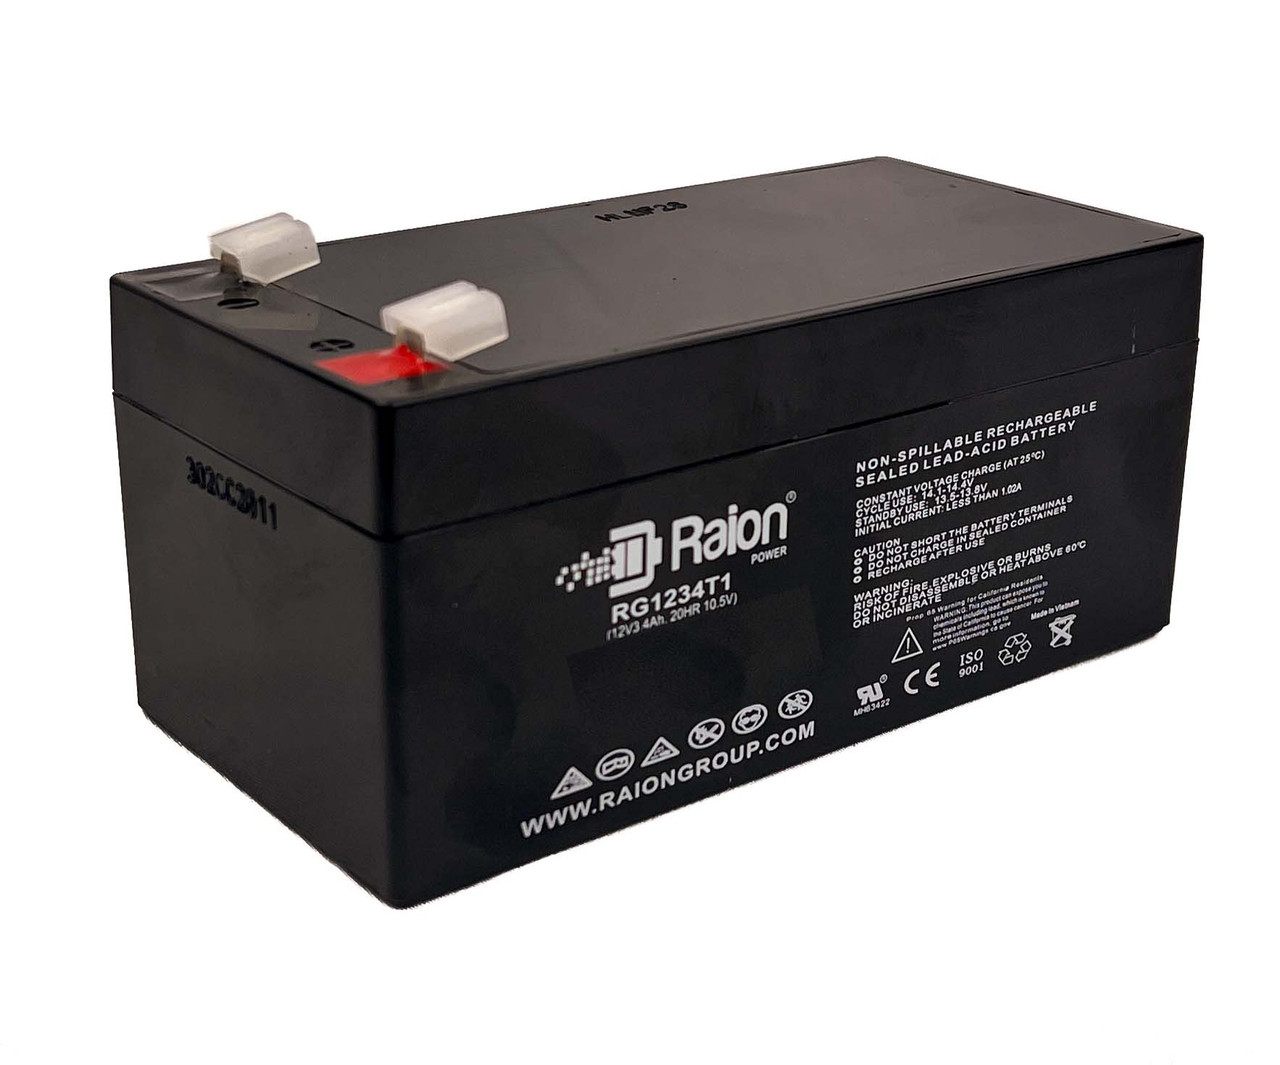 Raion Power 12V 3.4Ah Non-Spillable Replacement Battery for AJC D3.2S